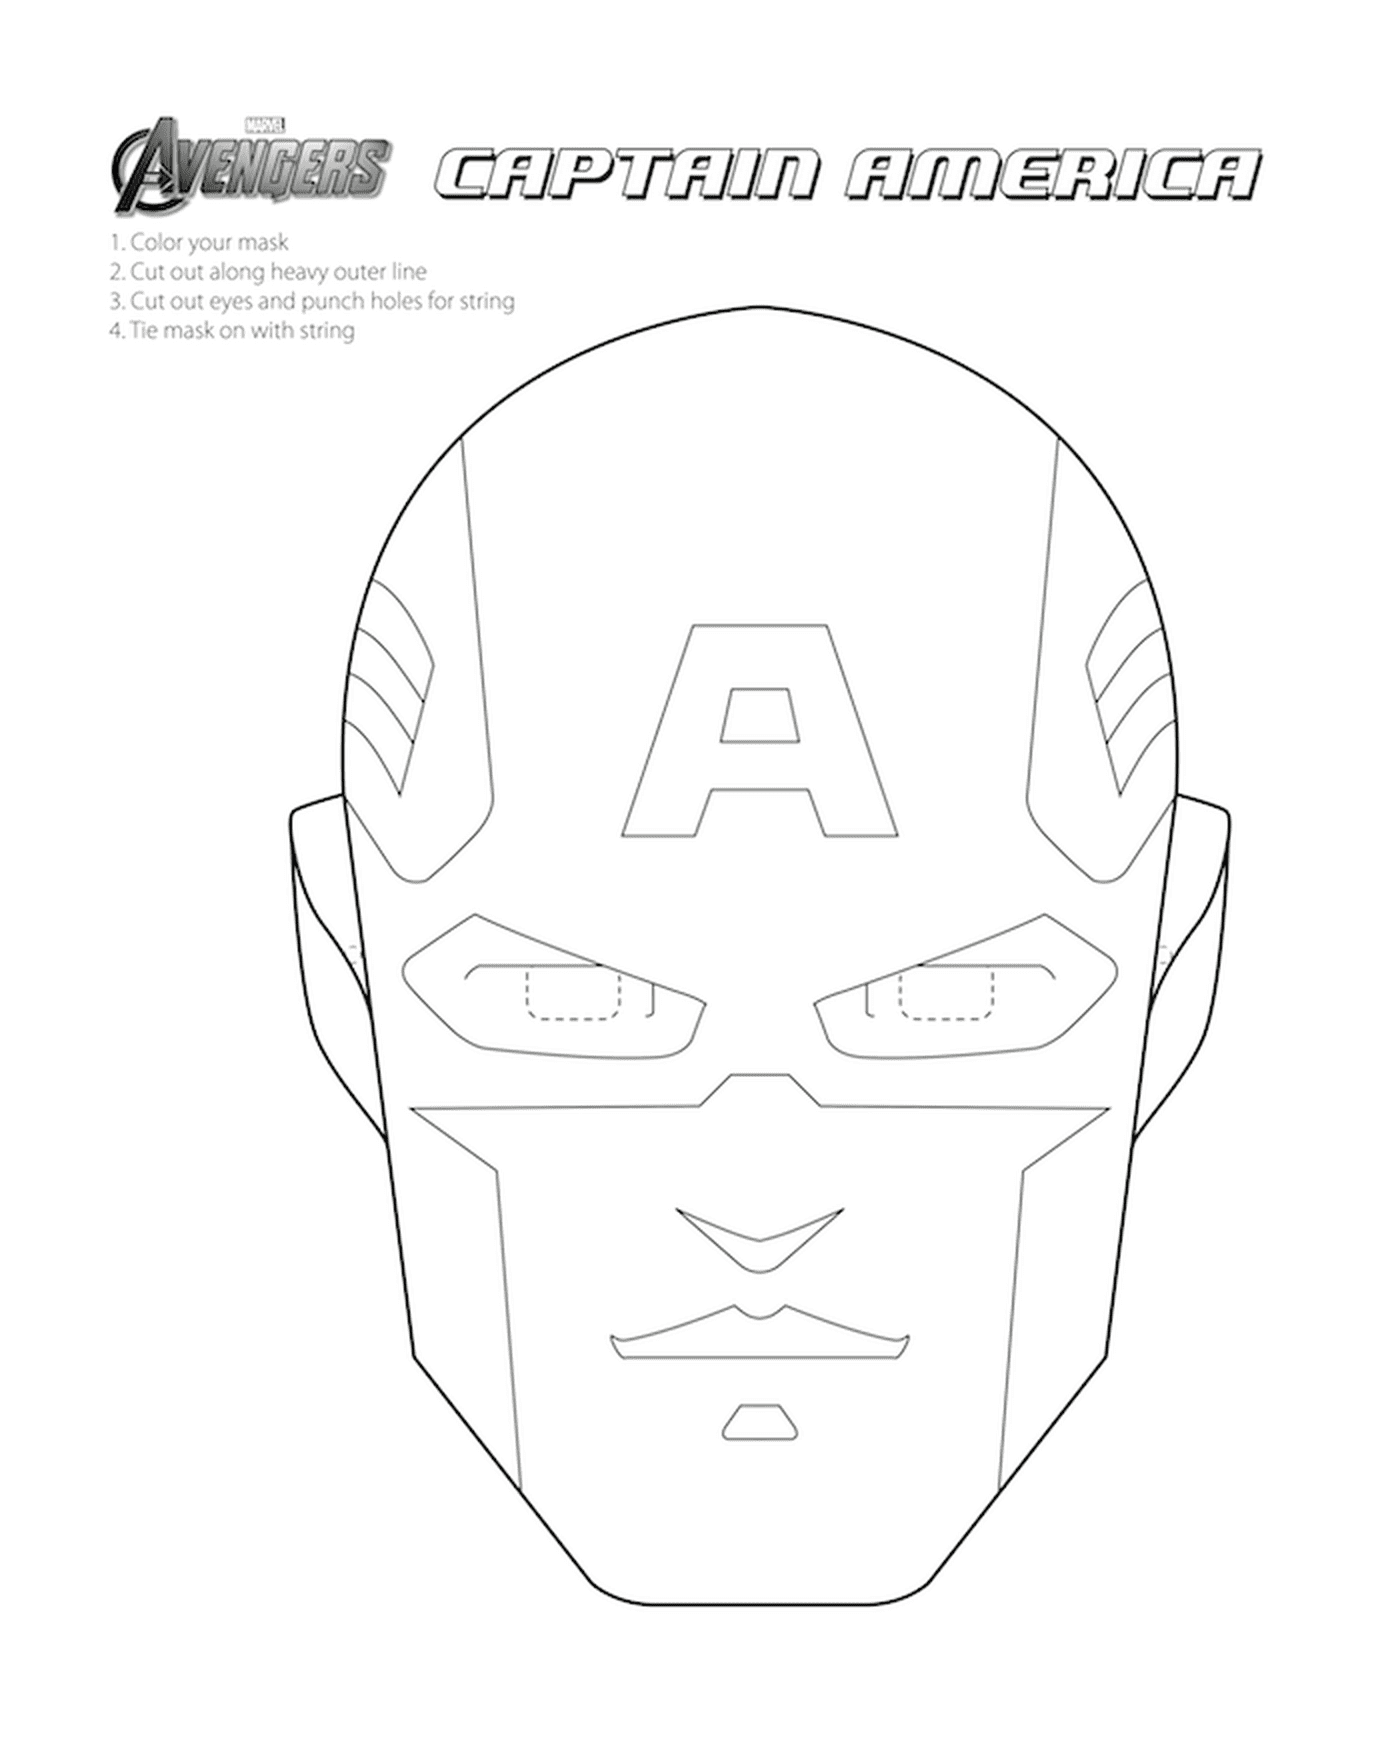  A mask from Captain America 